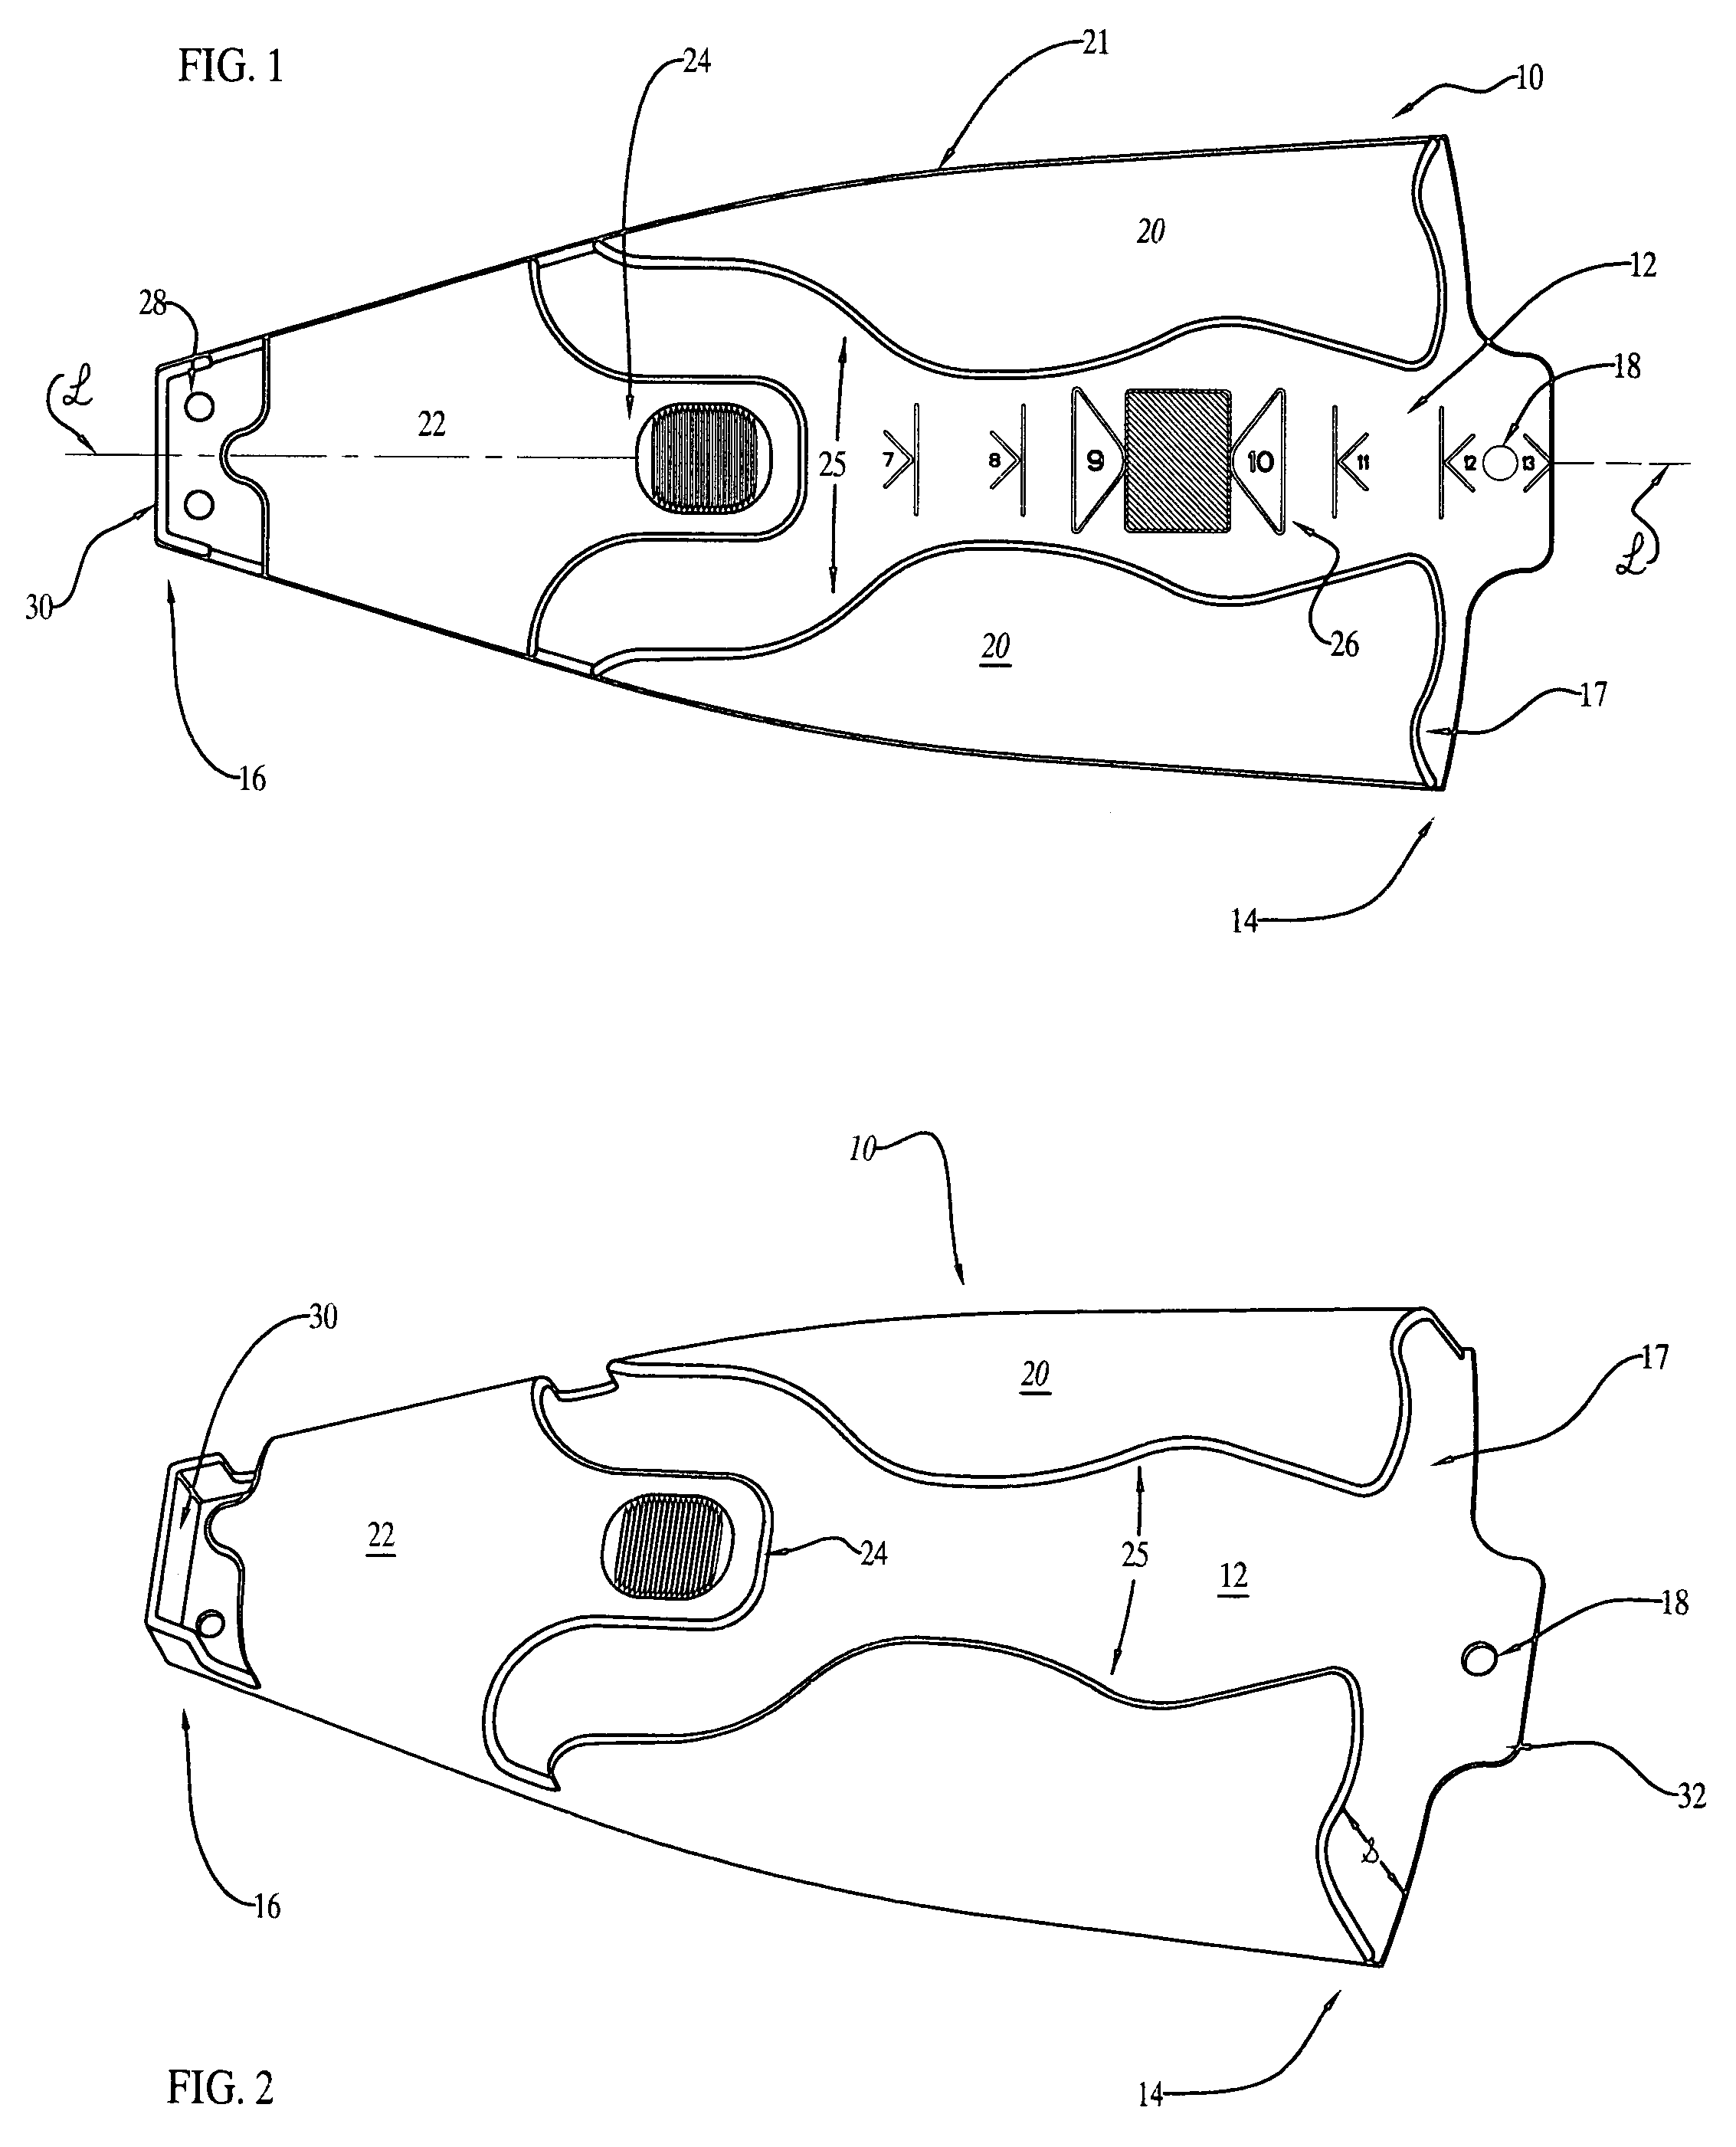 Device and method for gripping, holding and measuring a fish